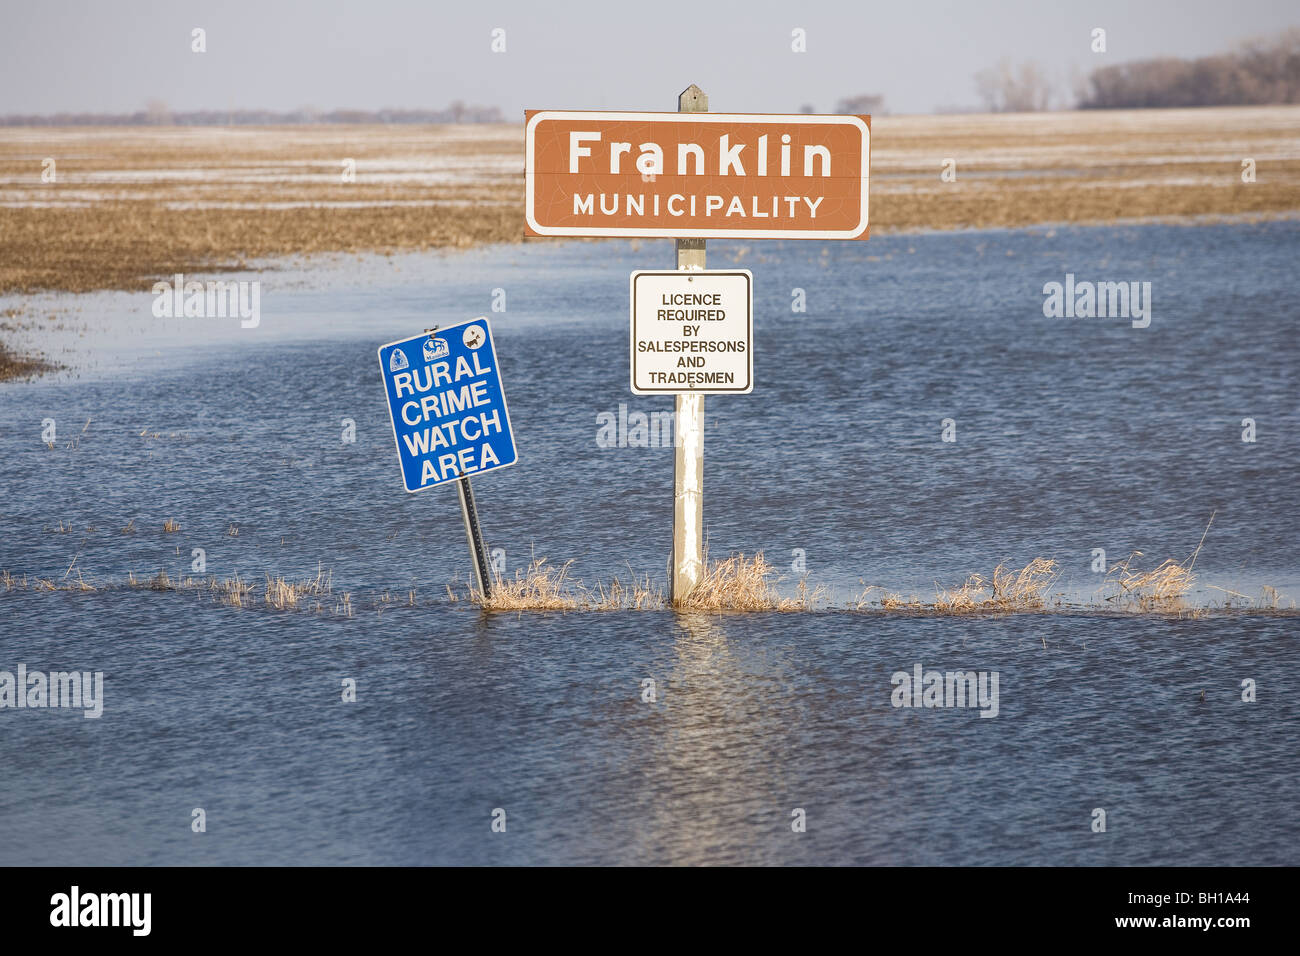 Floodwaters from Red River make field look like a lake, Franklin, Manitoba, Canada Stock Photo